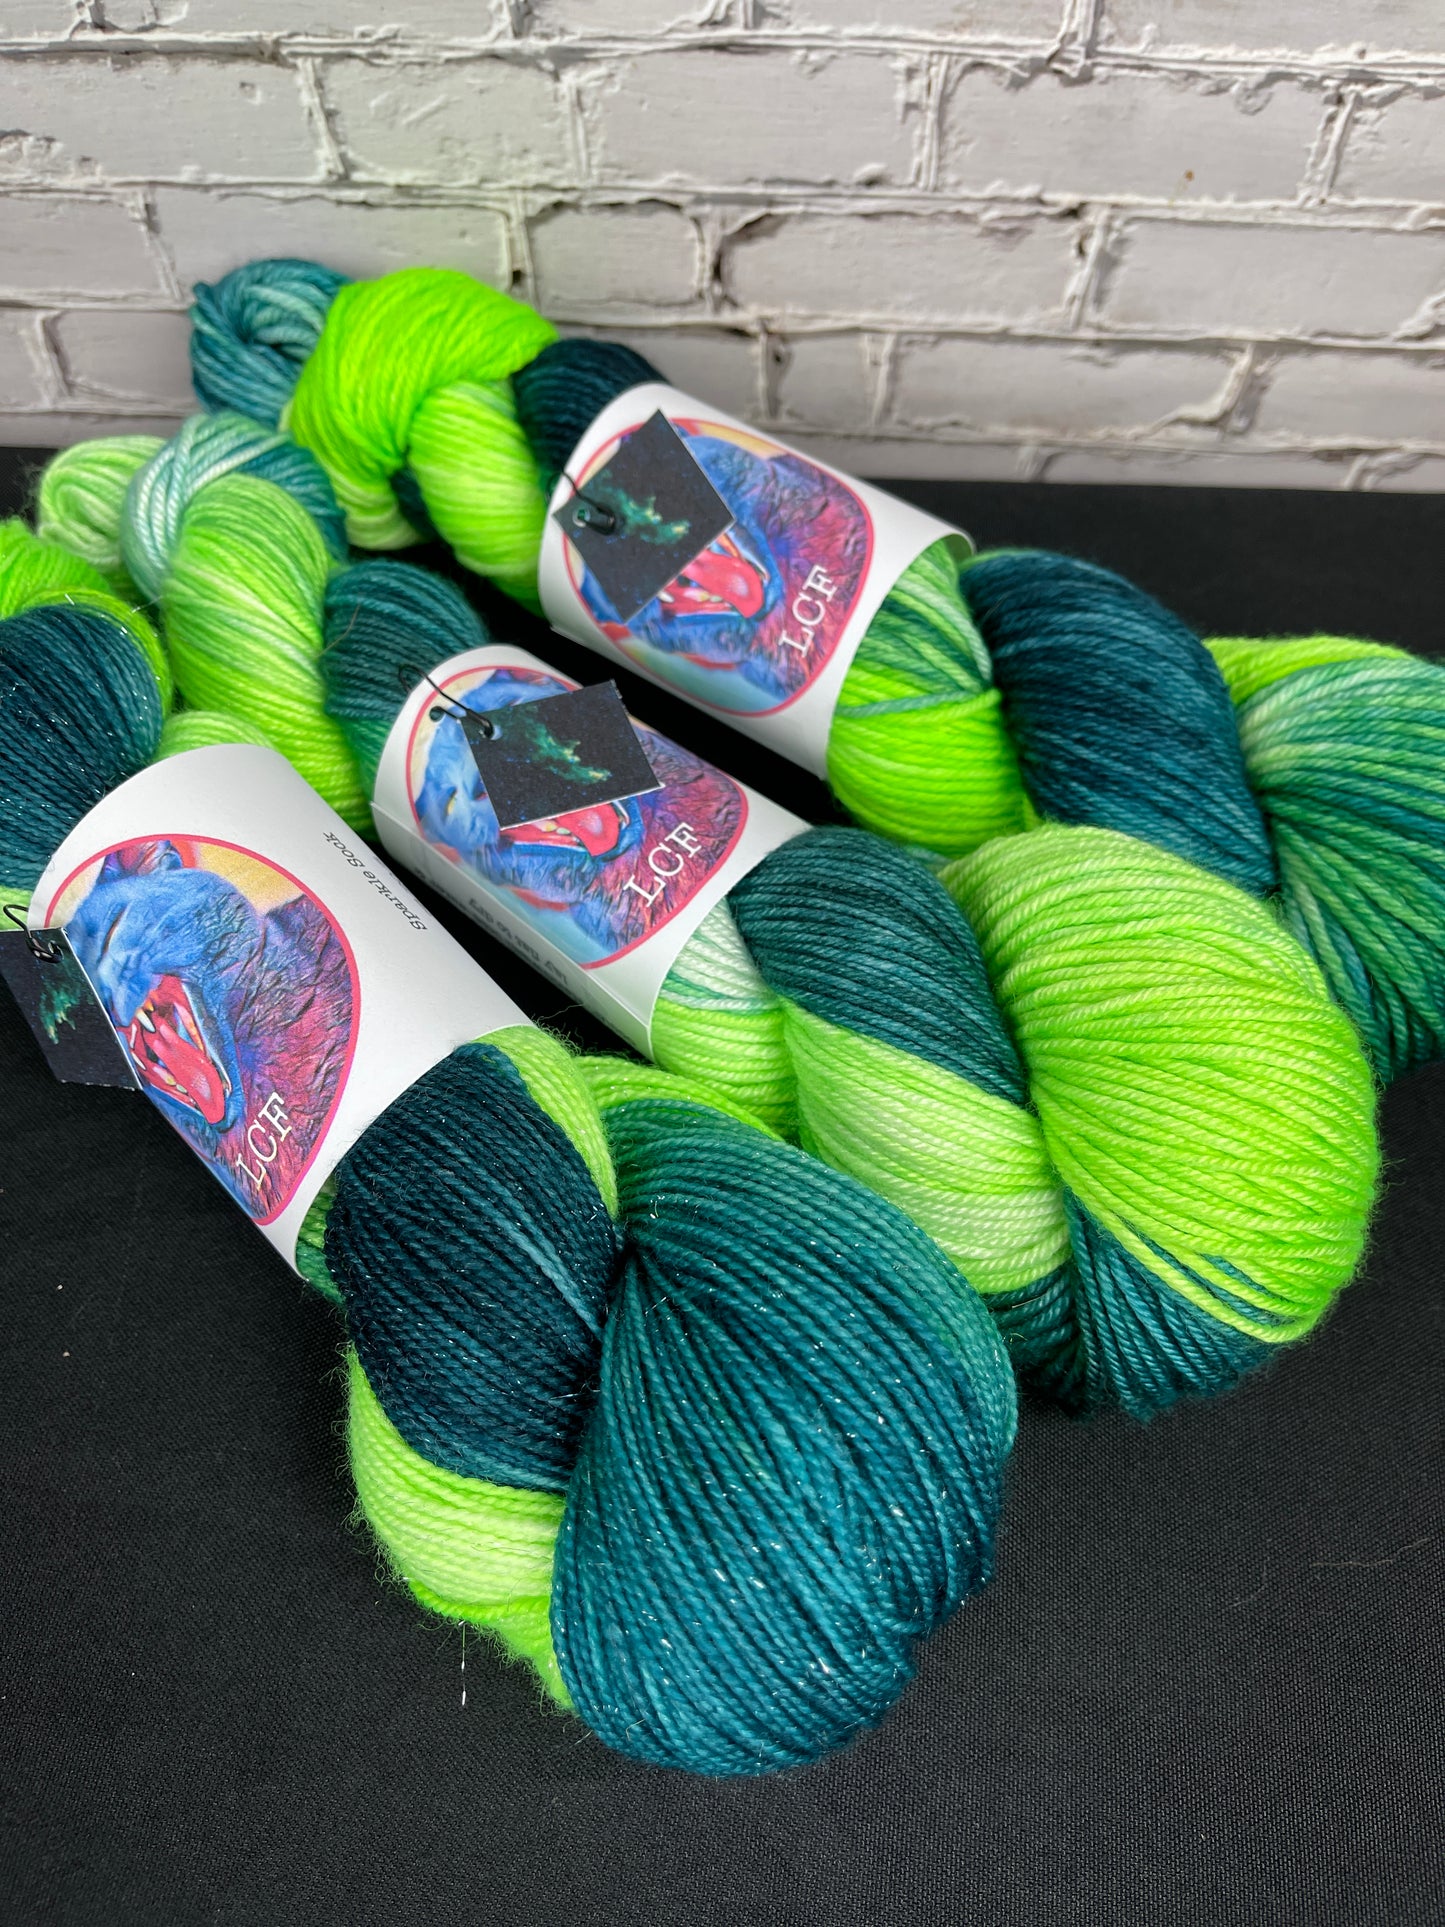 "Witch Head Nebula!" on Various Yarn Bases